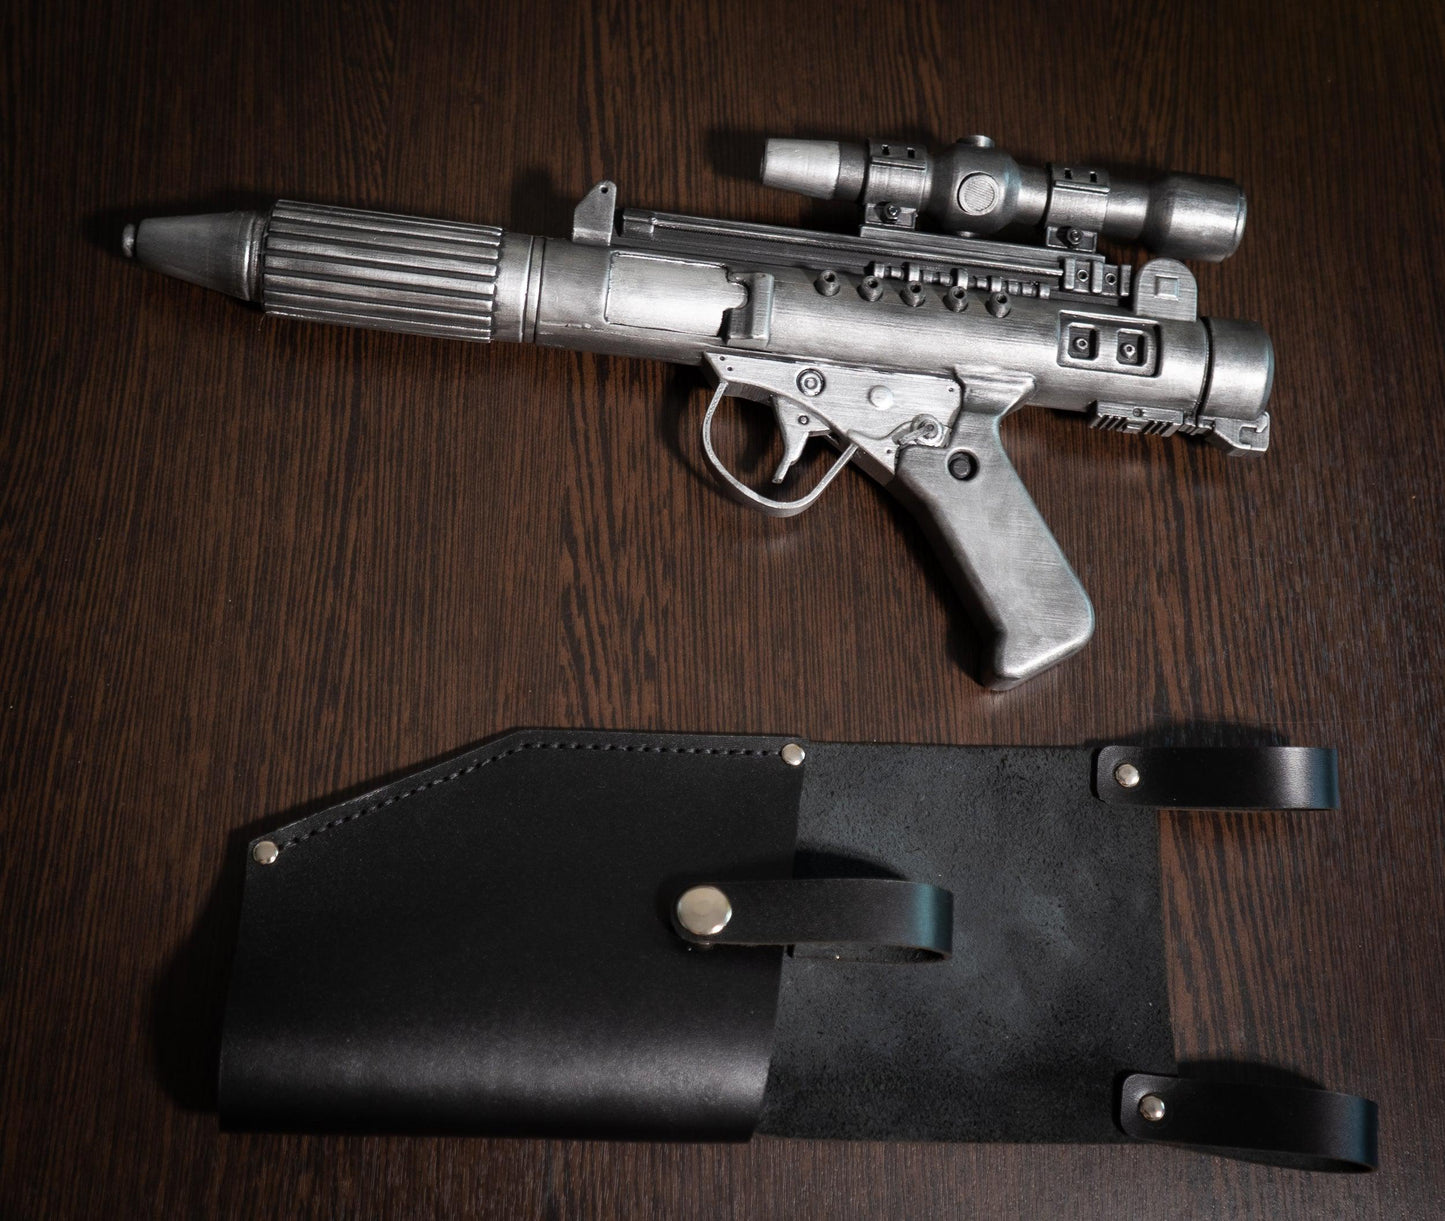 DH-17 blaster pistol with leather holster | Star Wars Replica | Star Wars Props | Star Wars Cosplay - 3DPrintProps